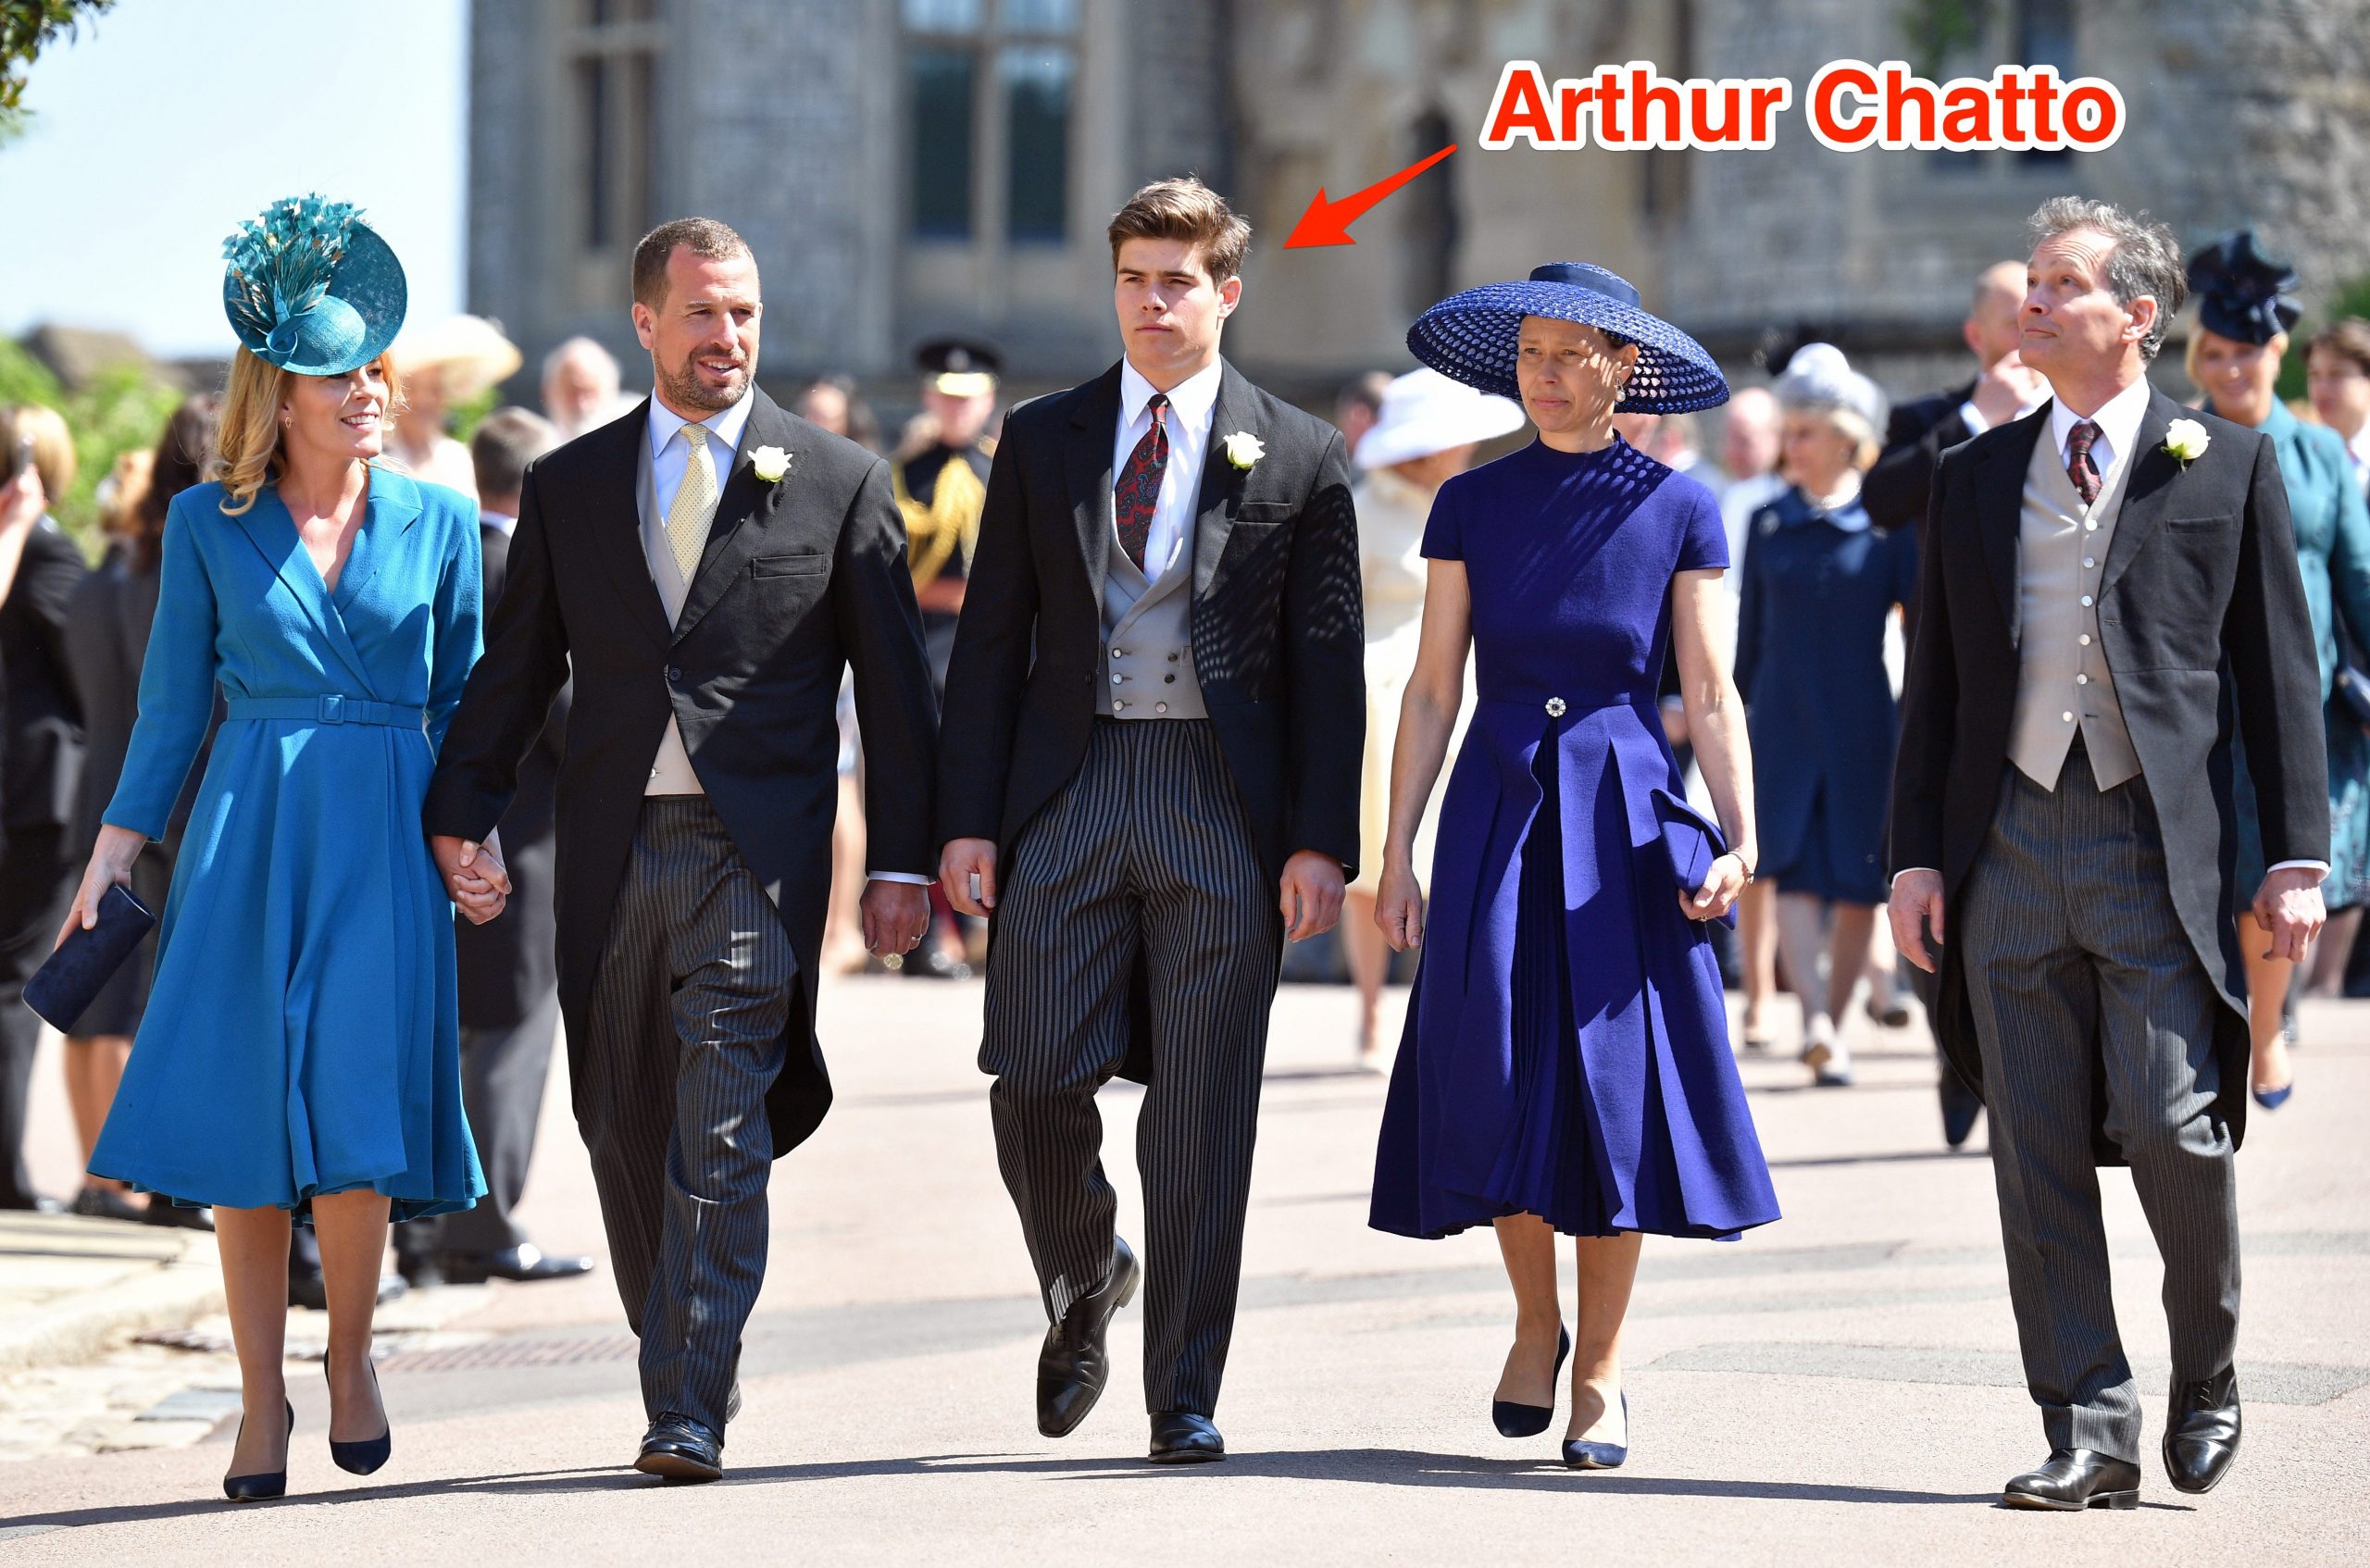 Arthur Chatto (center) pictured attending the royal wedding of Prince Harry and Meghan Markle in 2018.